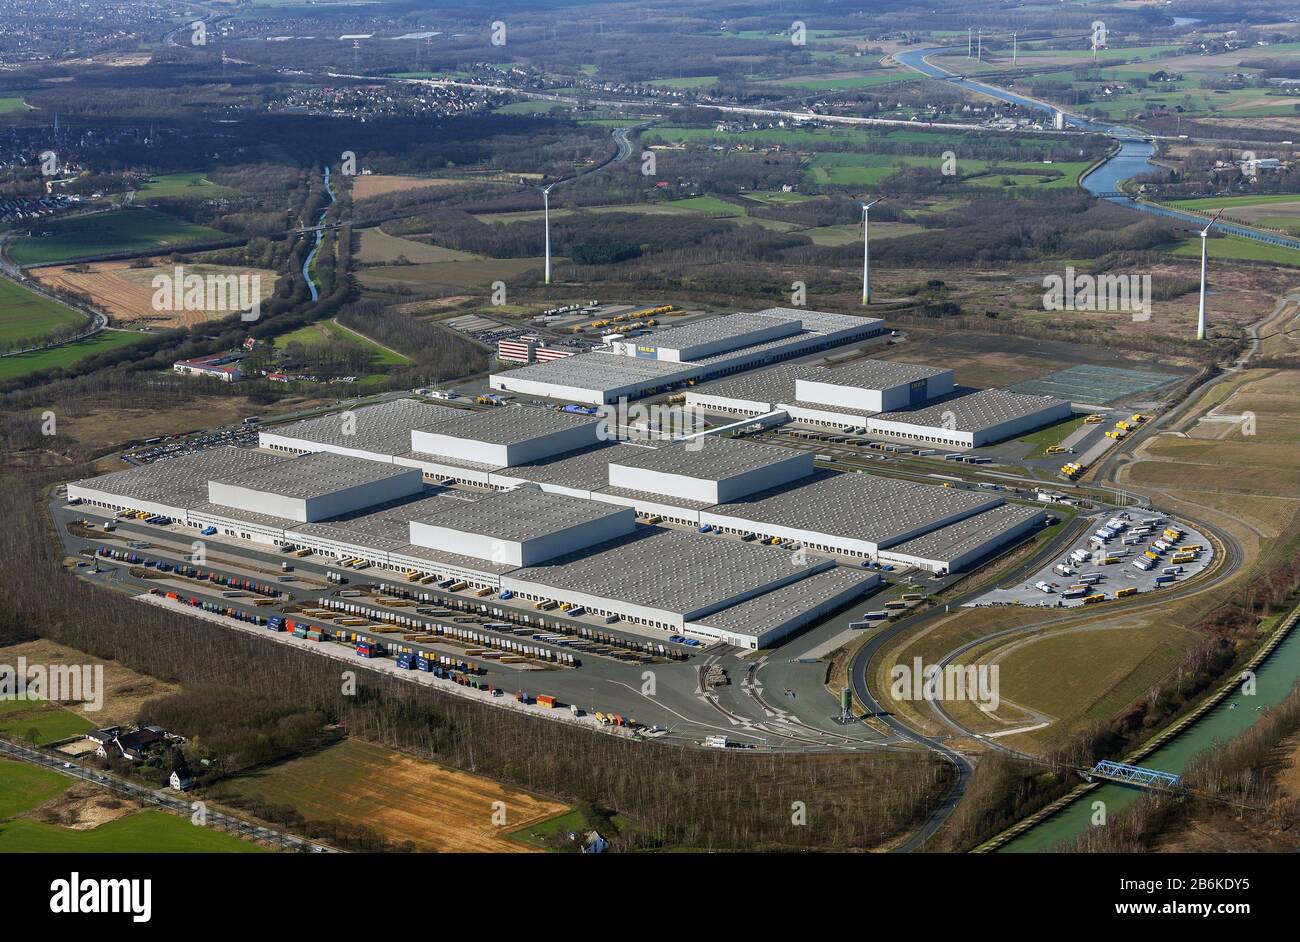 distribution centre of IKEA in Dortmun-Ellinghausen, which was built on a former heap of Hoesch AG, 19.03.2012, aerial view, Germany, North Rhine-Westphalia, Ruhr Area, Dortmund Stock Photo